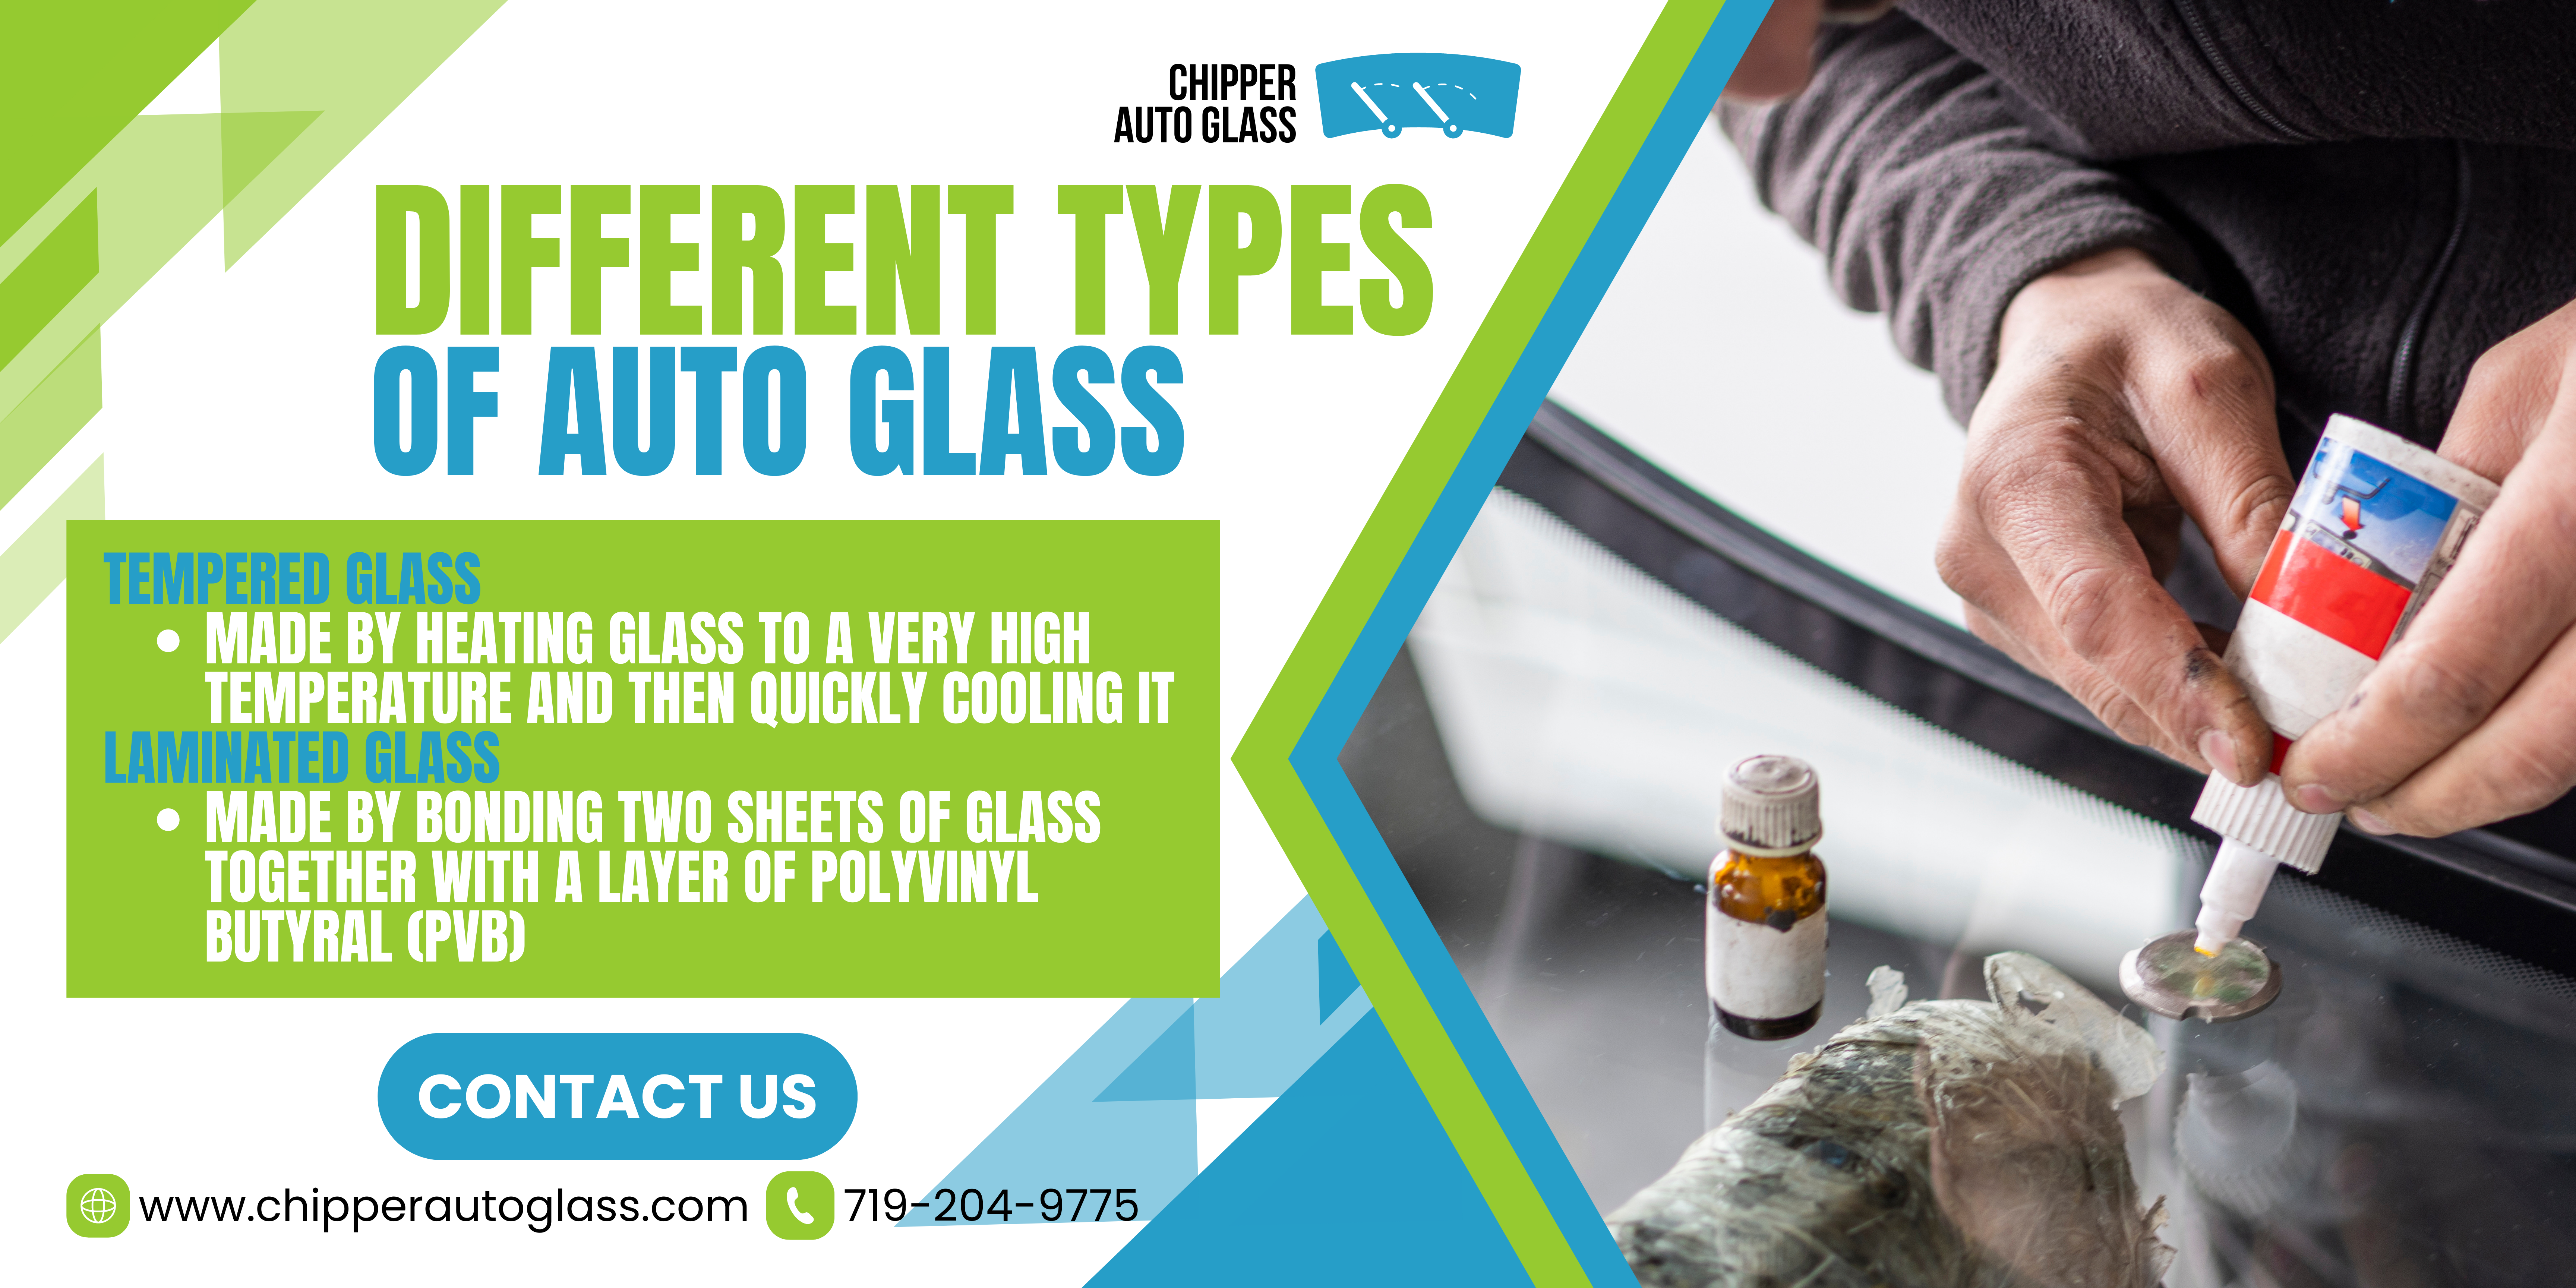 Signs That Indicate the Need for Side Auto Glass Repair or Replacement